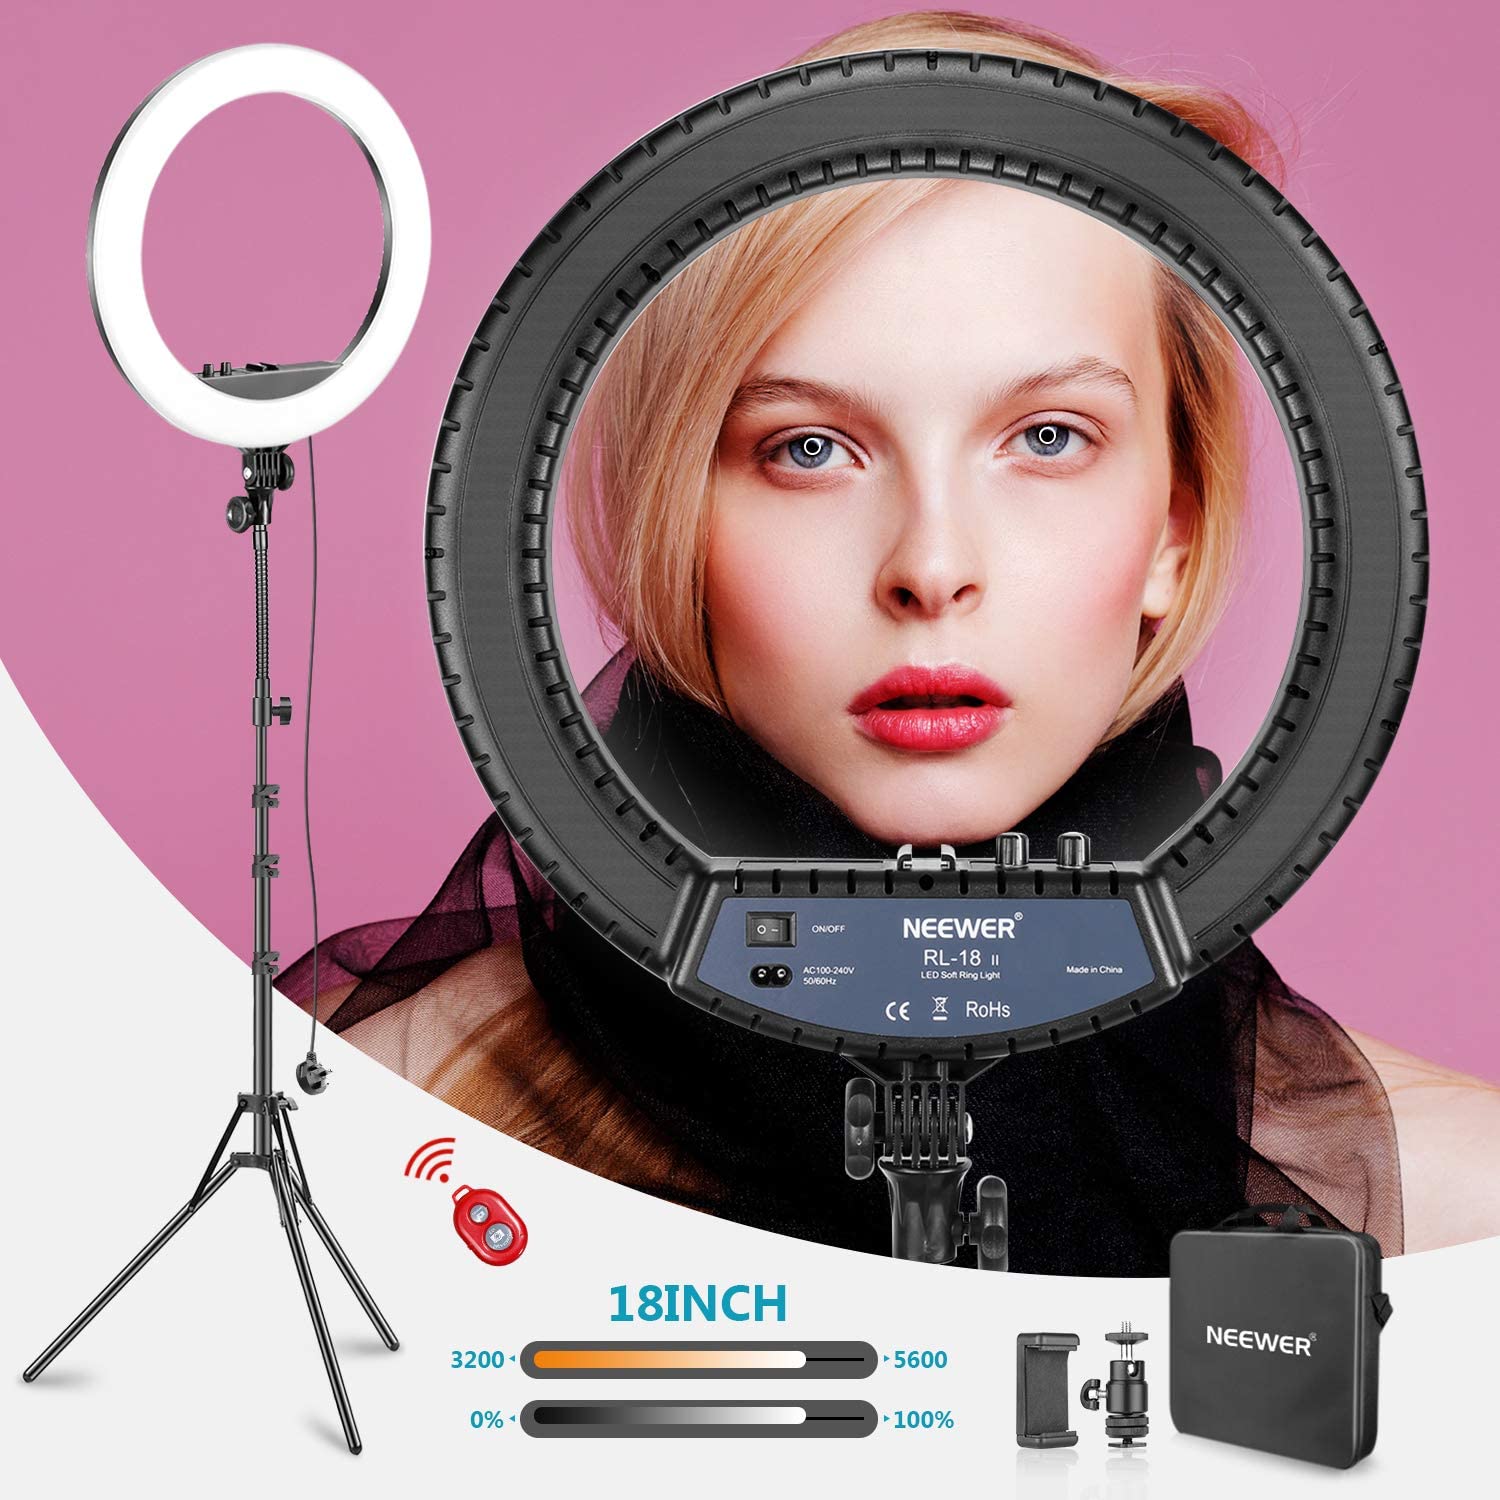 Neewer 14-inch Outer Dimmable LED Ring Light Kit Includes:30W Bi